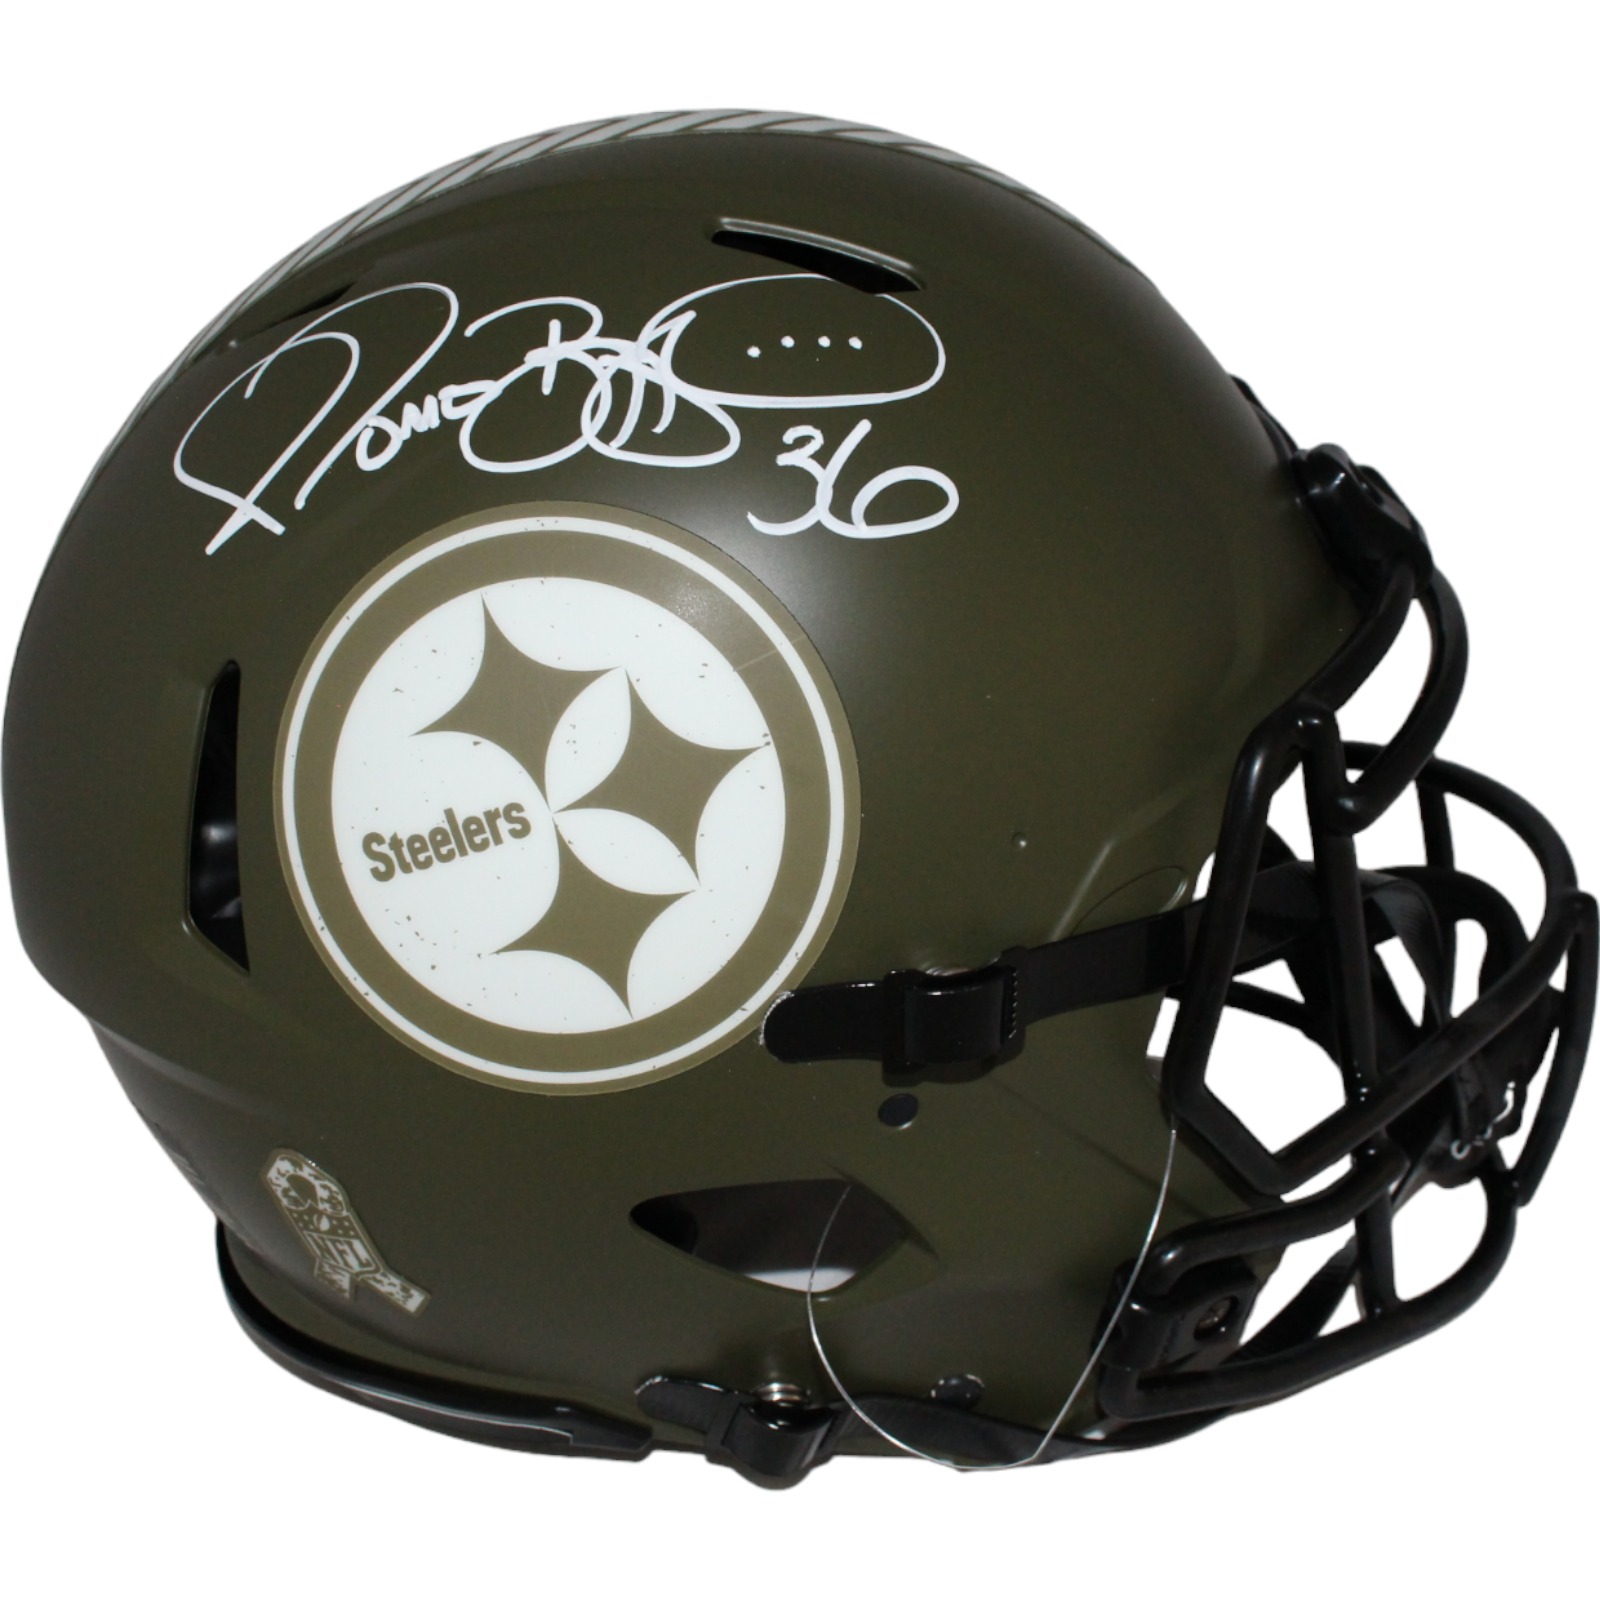 Jerome Bettis Signed Pittsburgh Steelers Authentic Helmet Salute BAS